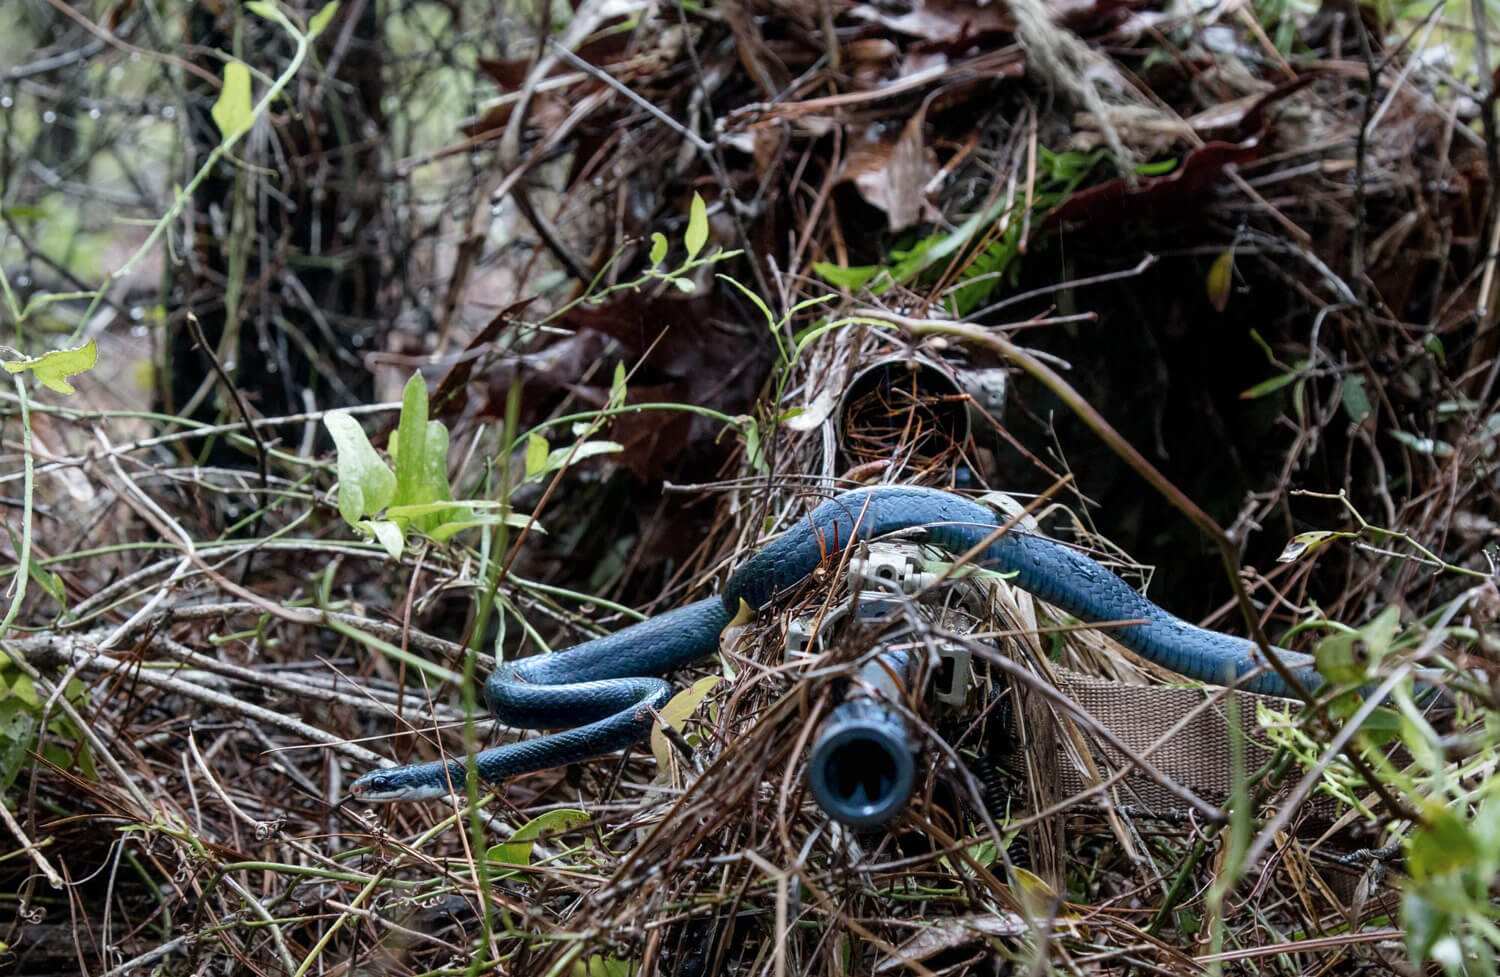 A southern black racer snake slithers across the barrel of Alabama Army National Guard sniper PFC William Snyder’s rifle as he practices woodland stalking in a camouflaged ghillie suit during a 1st battalion, 173rd Infantry training exercise April 7, 2018, at Eglin Air Force Base. Alabama Army National Guard photo by SSG William Frye